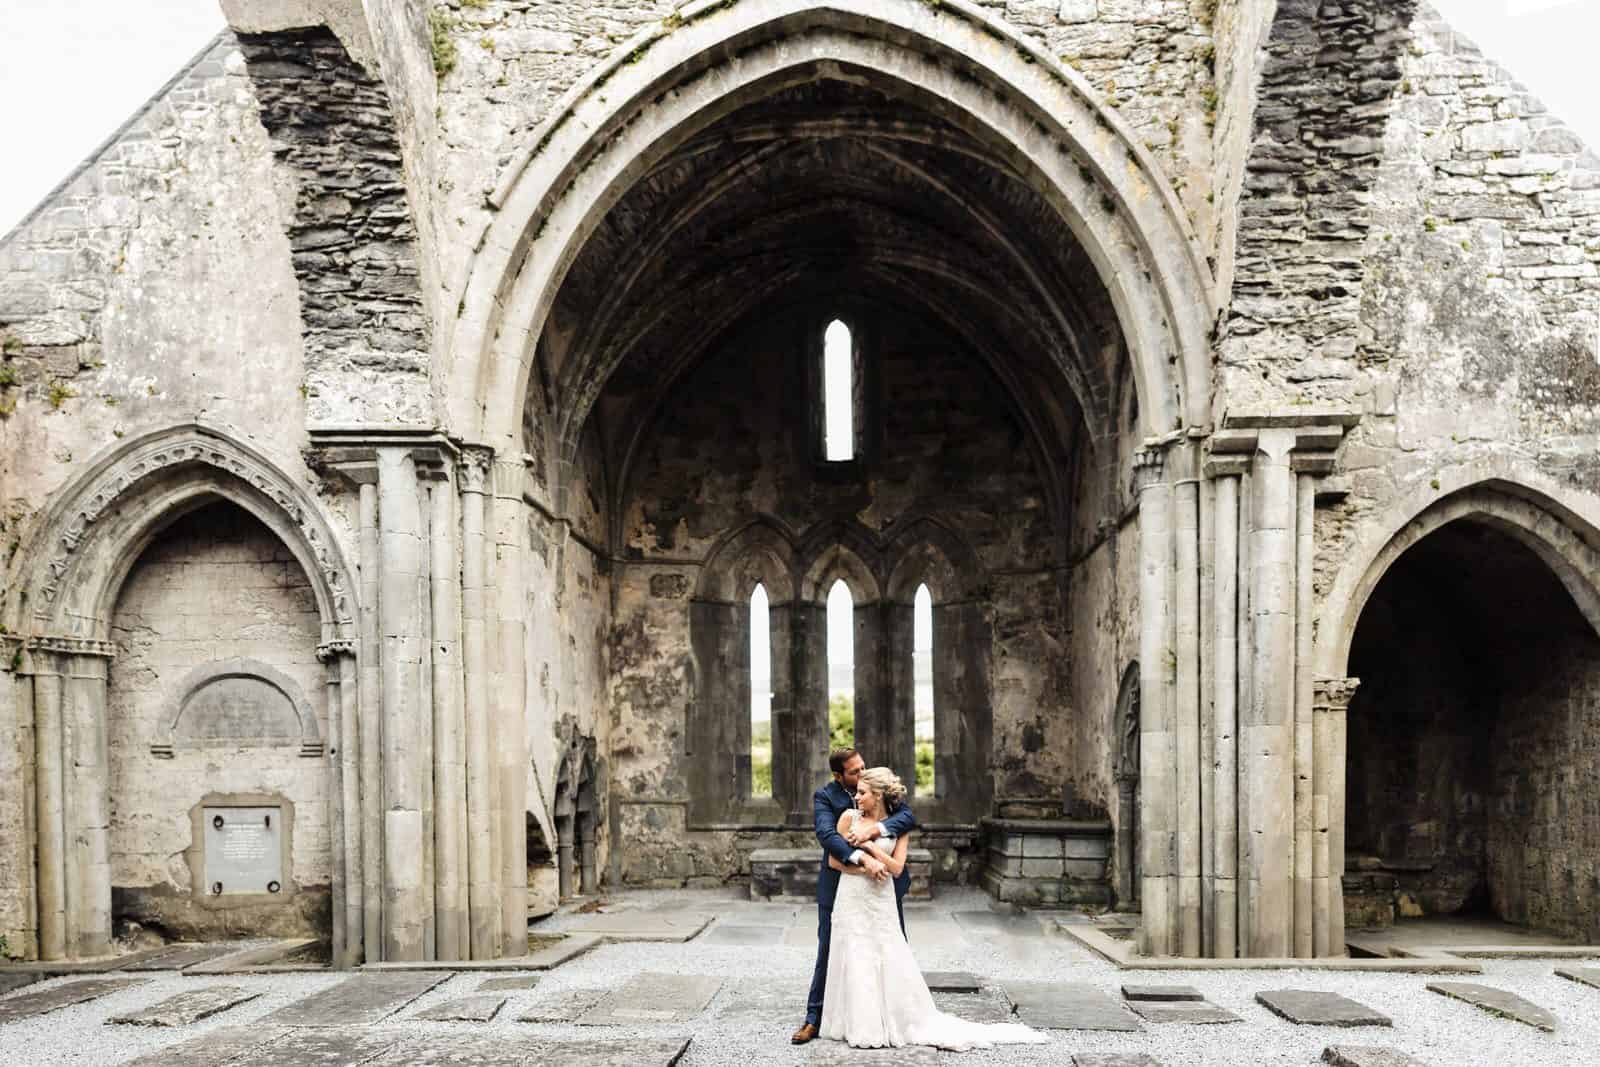 holding each other at corcomroe abbey after their Destination Wedding elopement